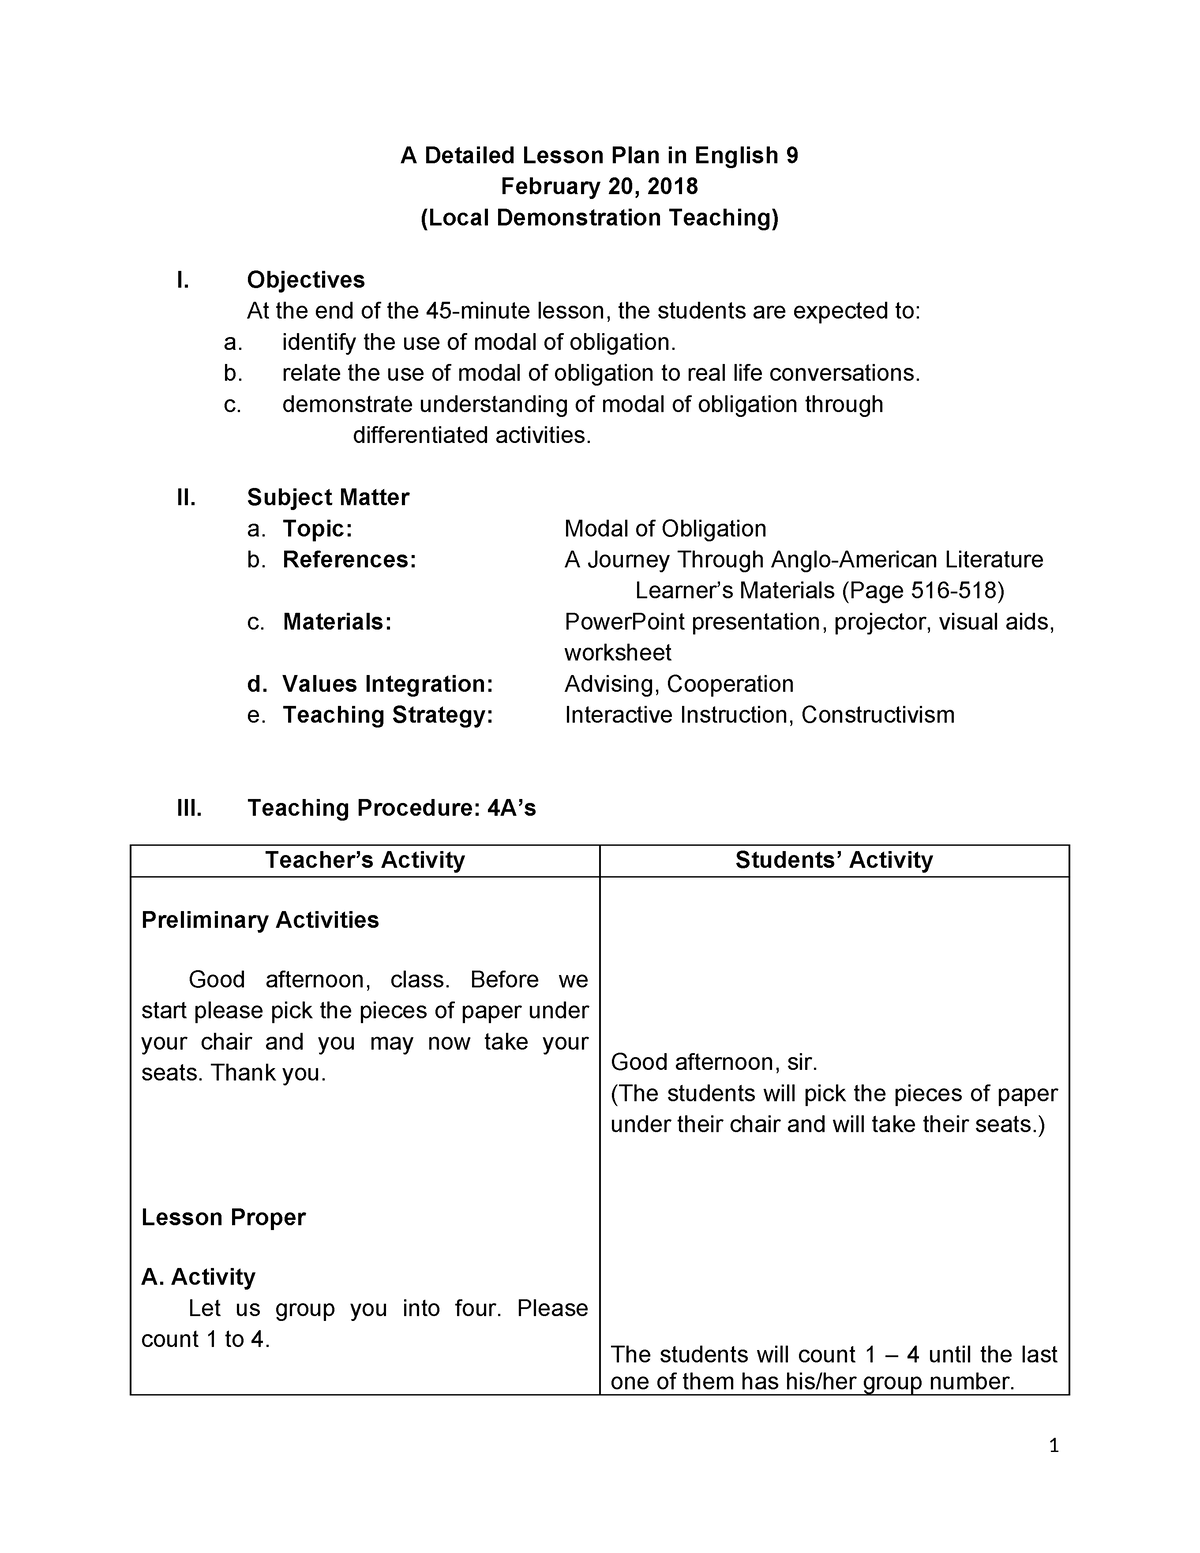 A Detailed Lesson Plan in English 9 - Objectives At the end of the 45 ...